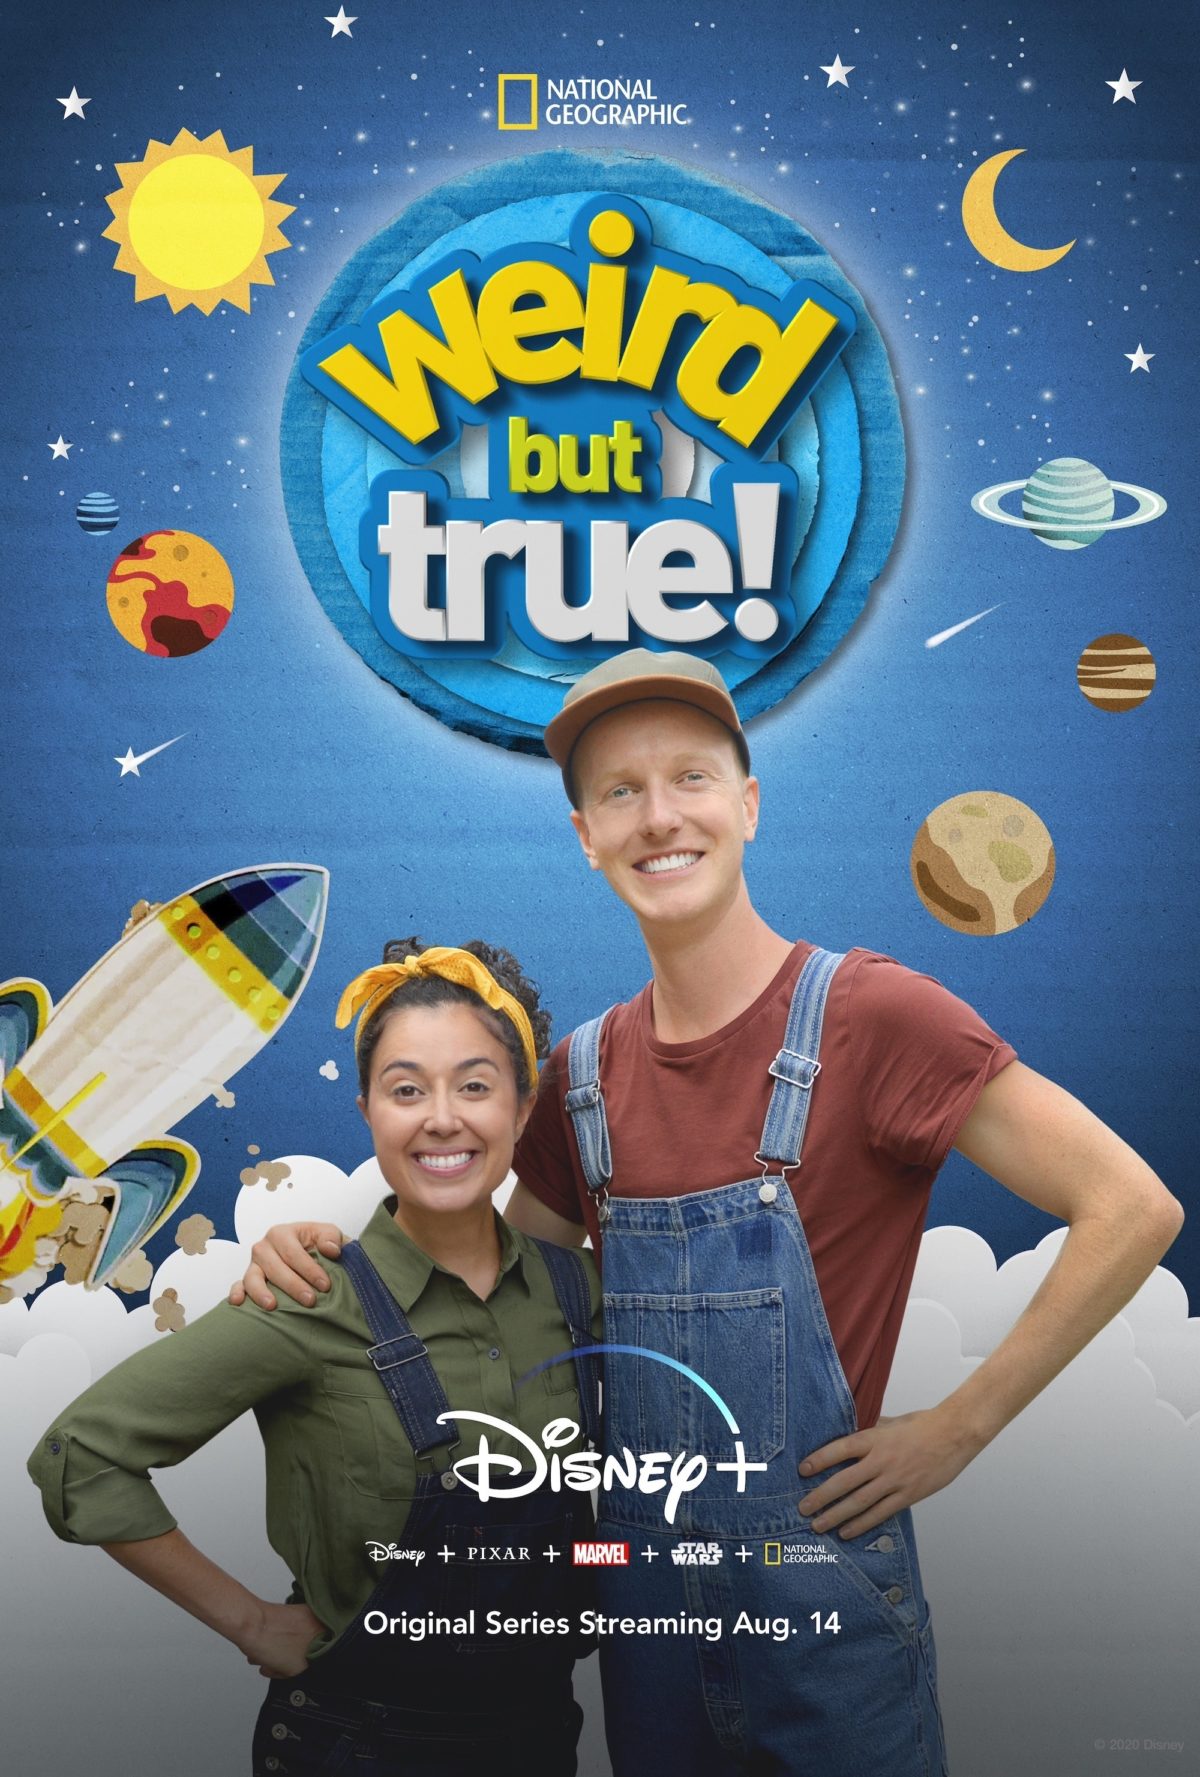 New Season of National Geographic’s Weird But True! Coming to Disney+